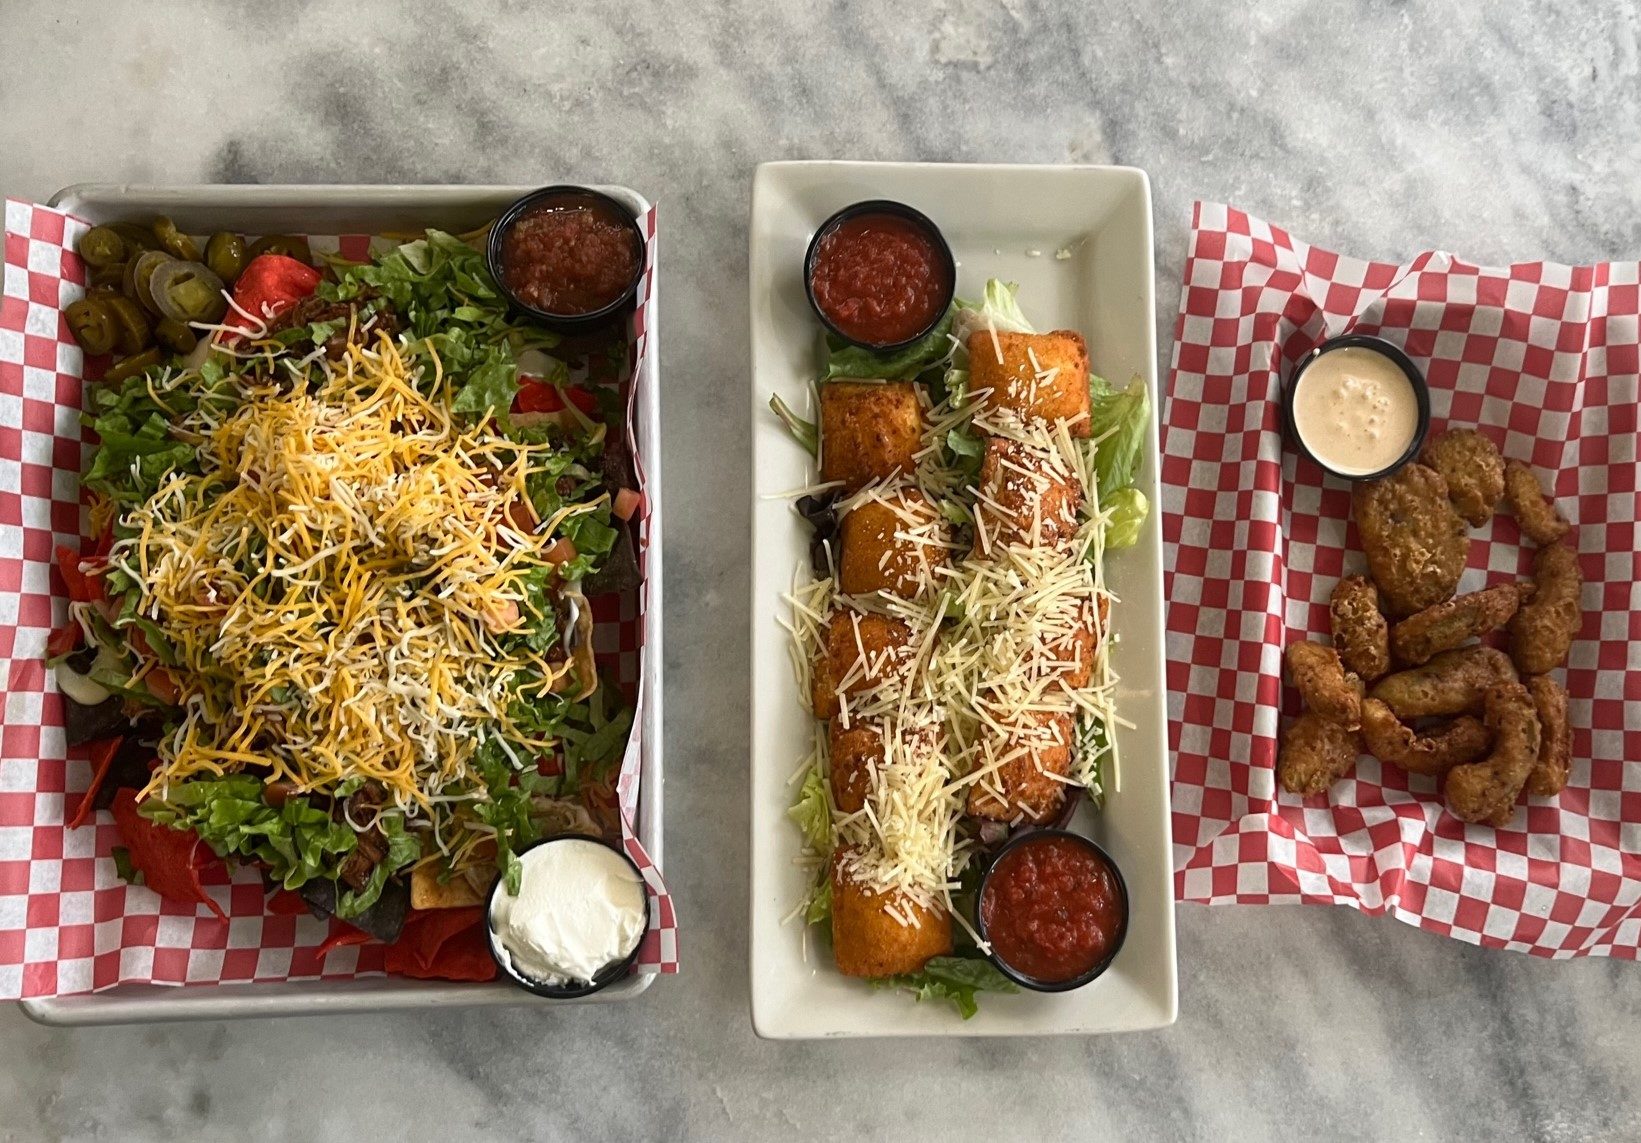 A row of three appetizers: nachos, toasted ravioli, and deep fried avocado slices.